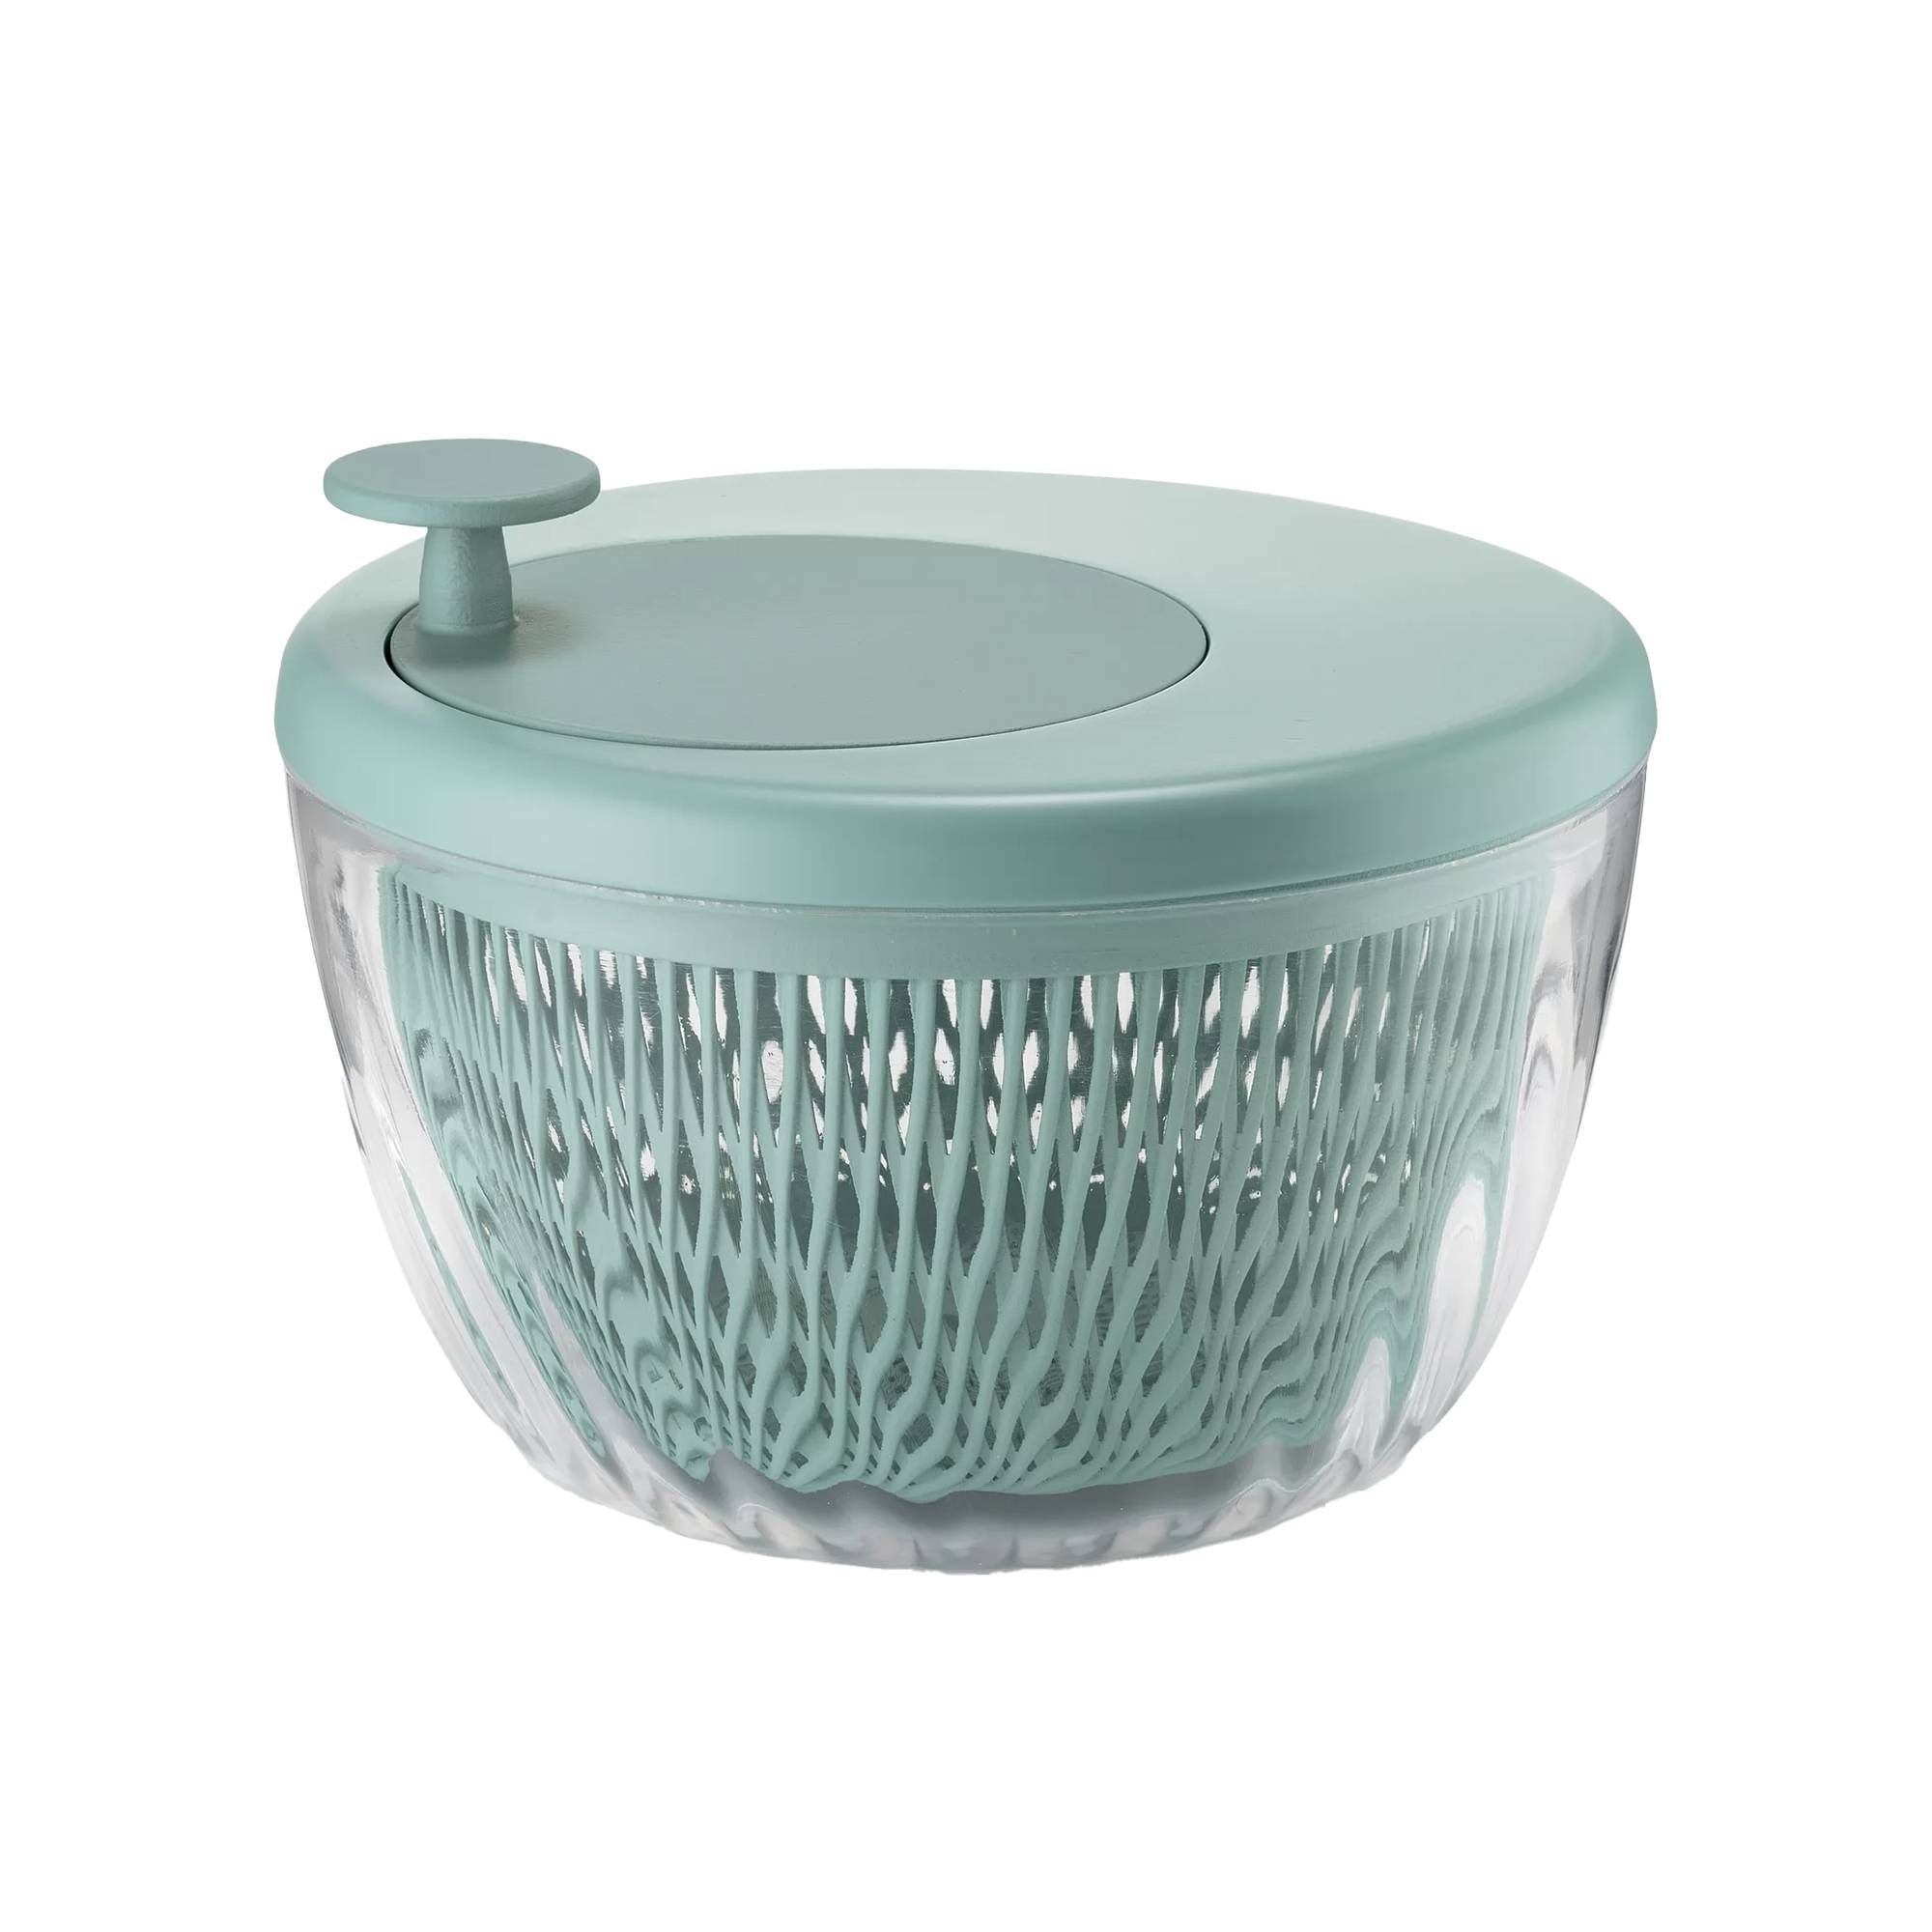 Guzzini Spin & Store Salad Spinner Green Image 1